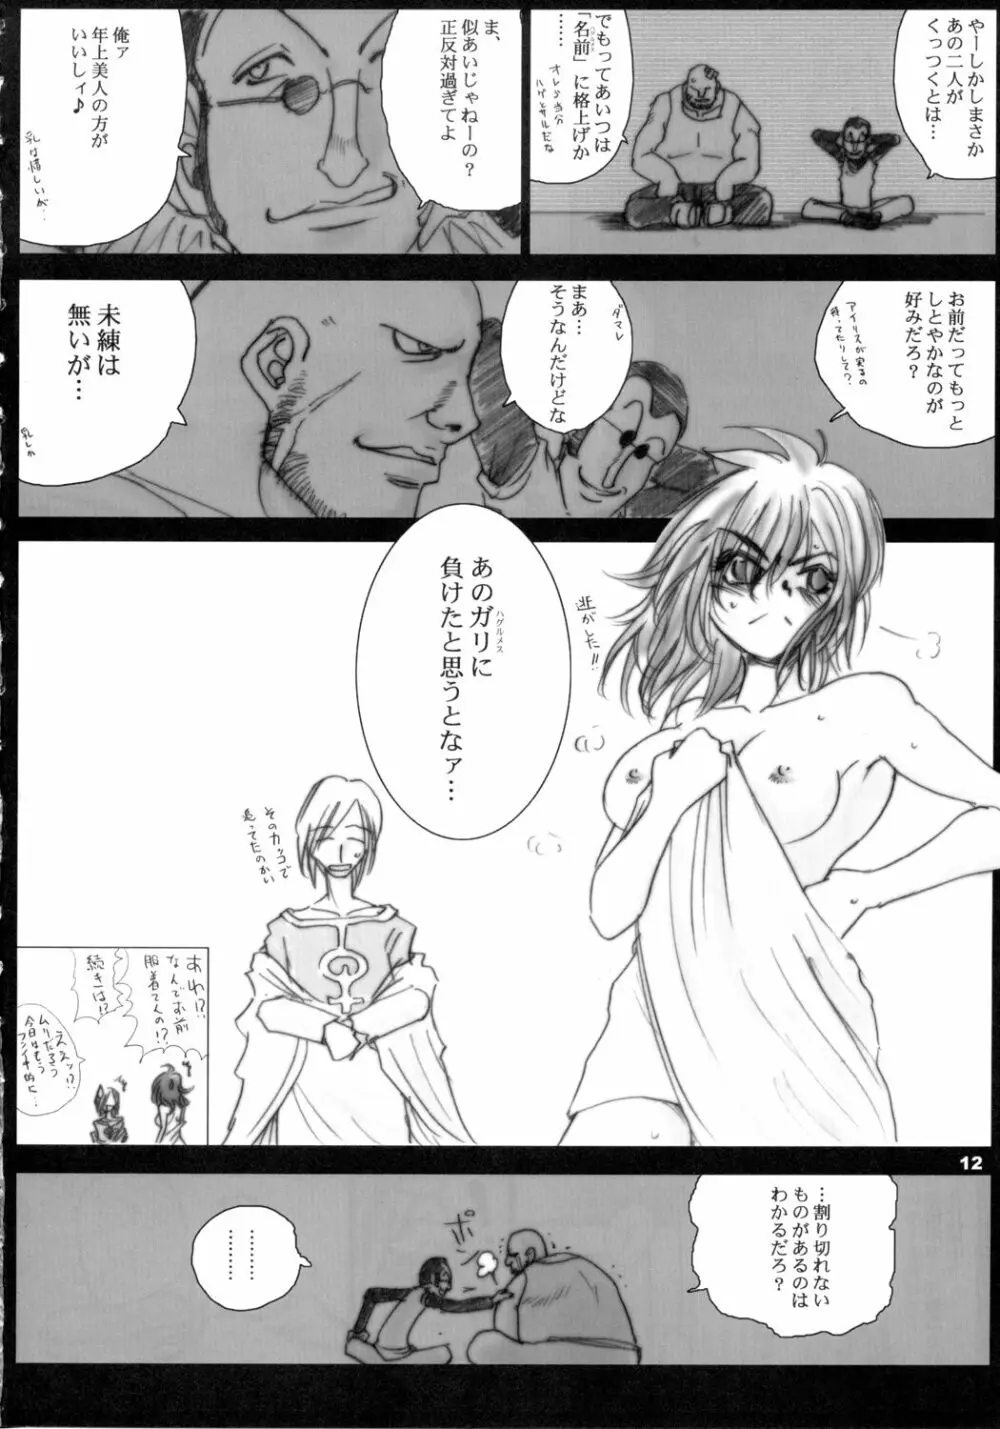 Recollection of Retishia - page11